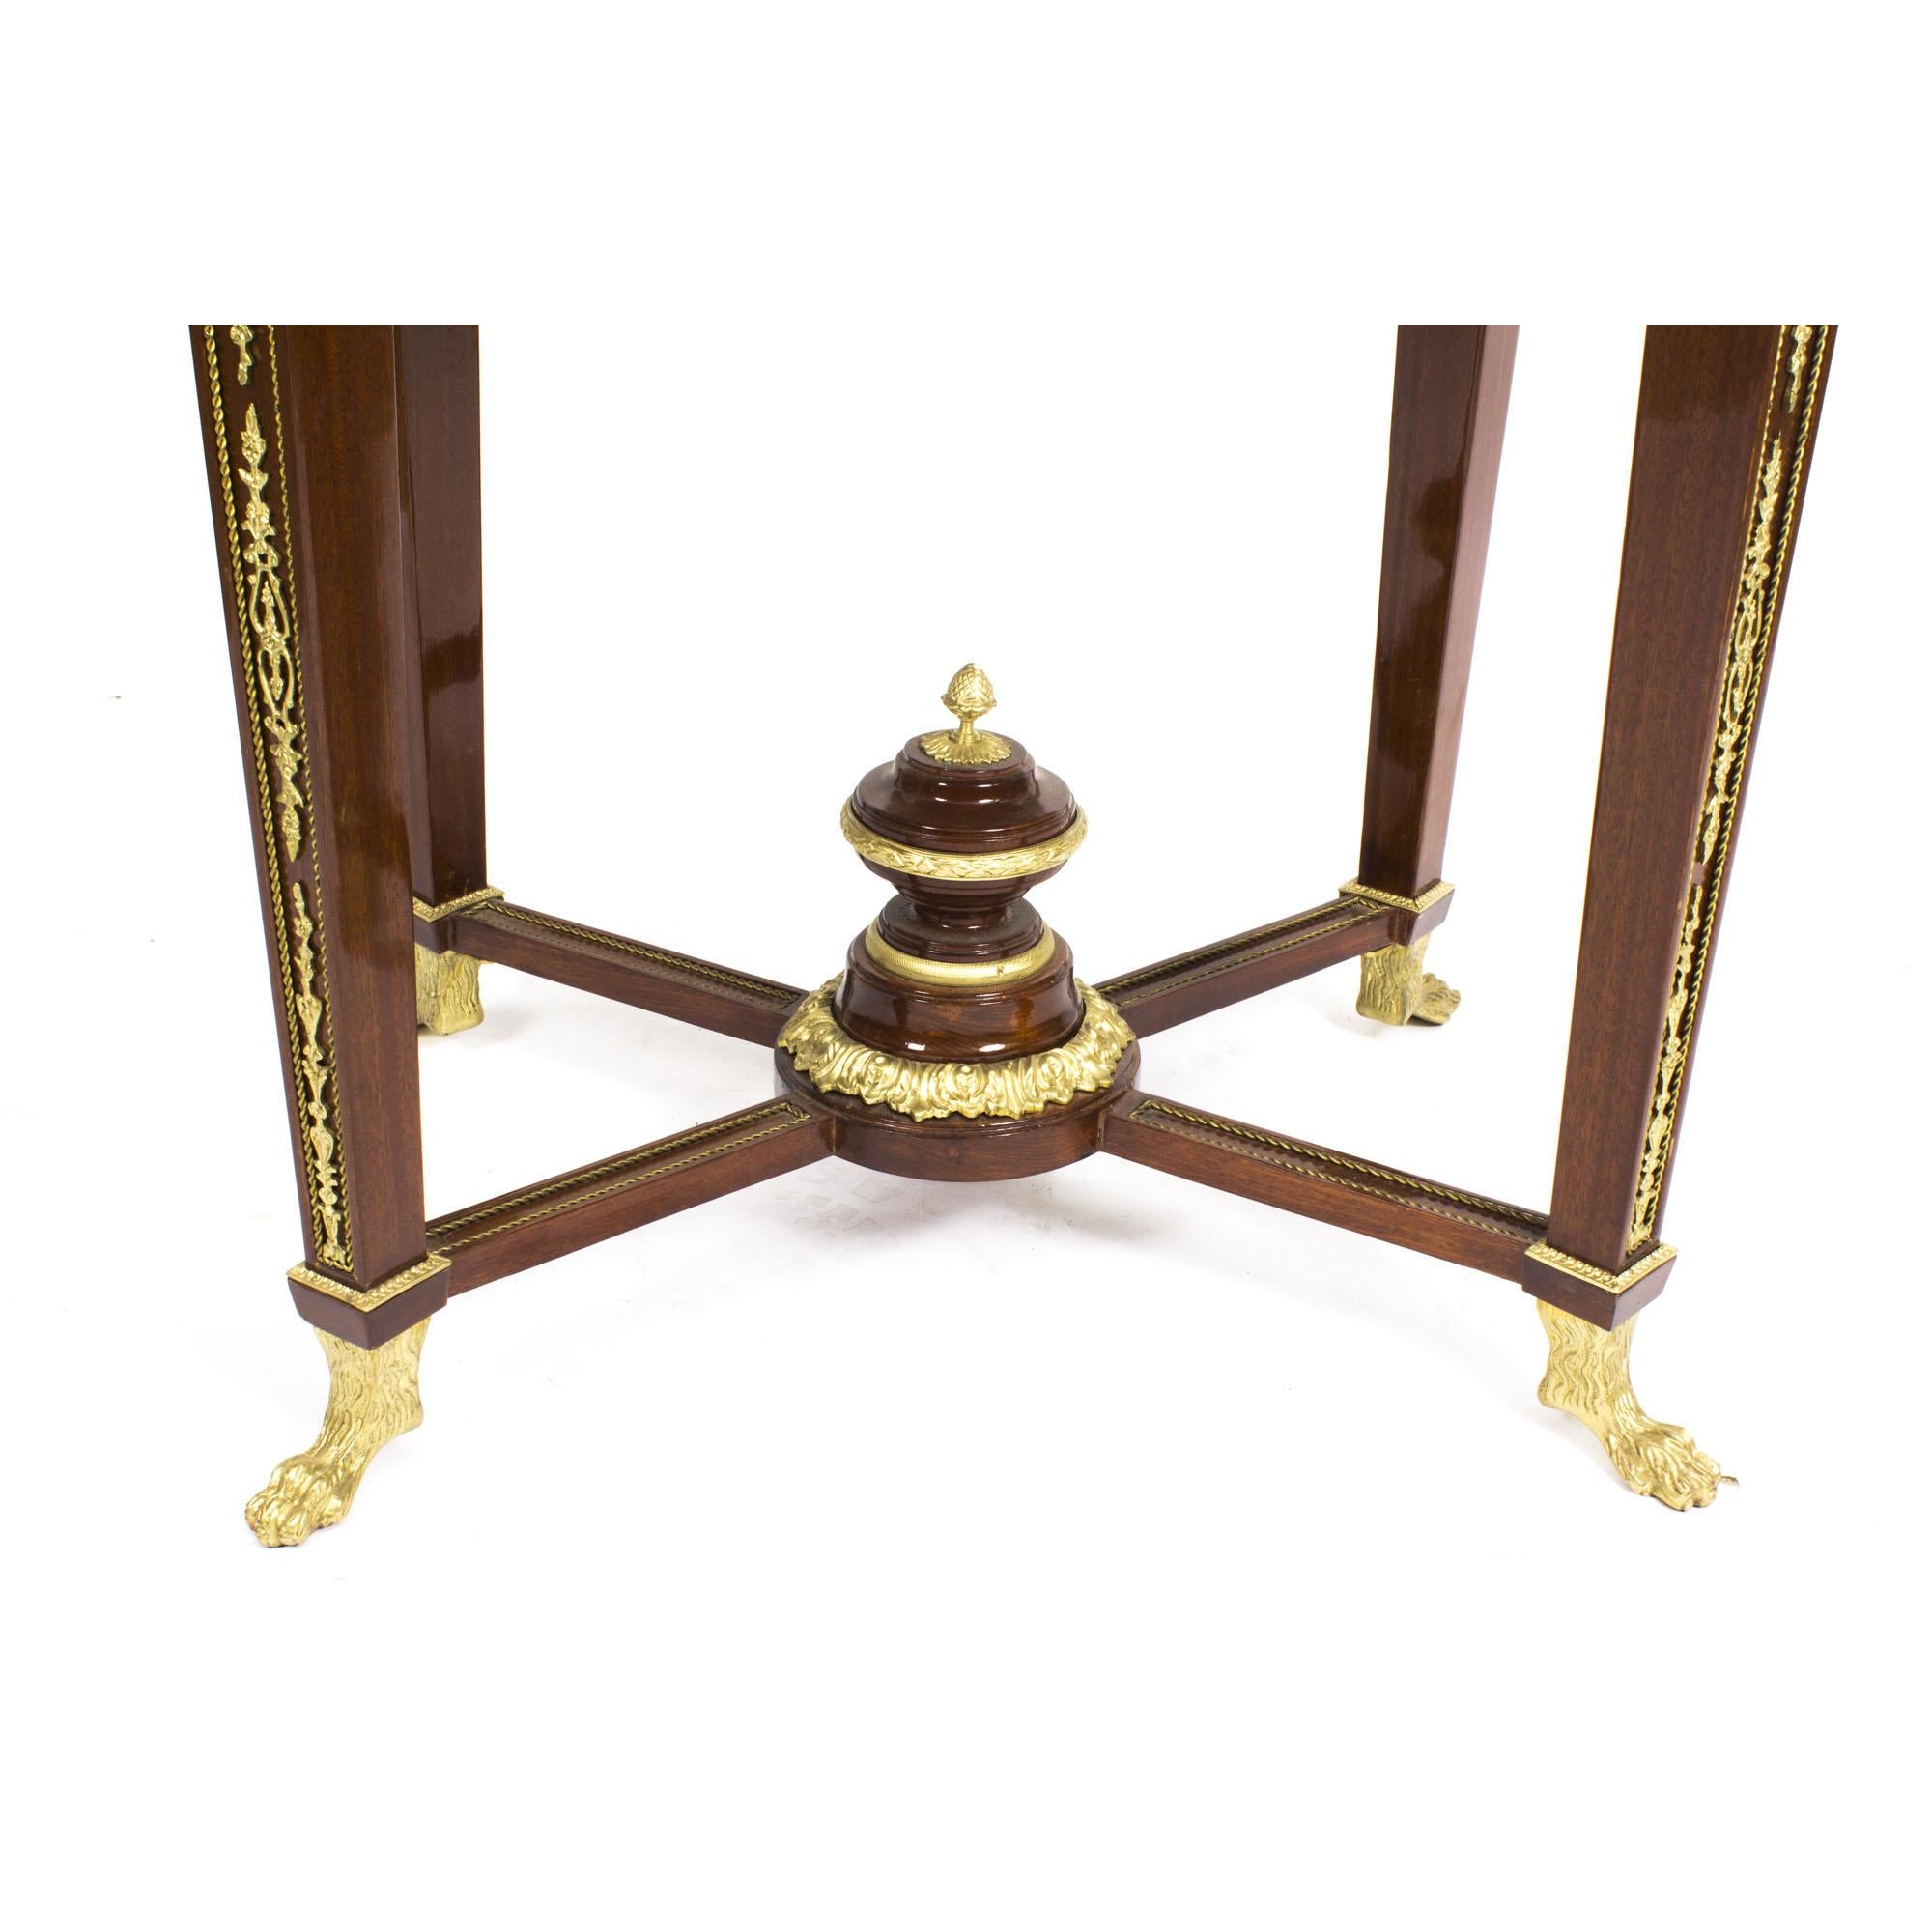 Vintage Empire Revival Marble Top Ormolu Mounted Occasional Table 20th C For Sale 4